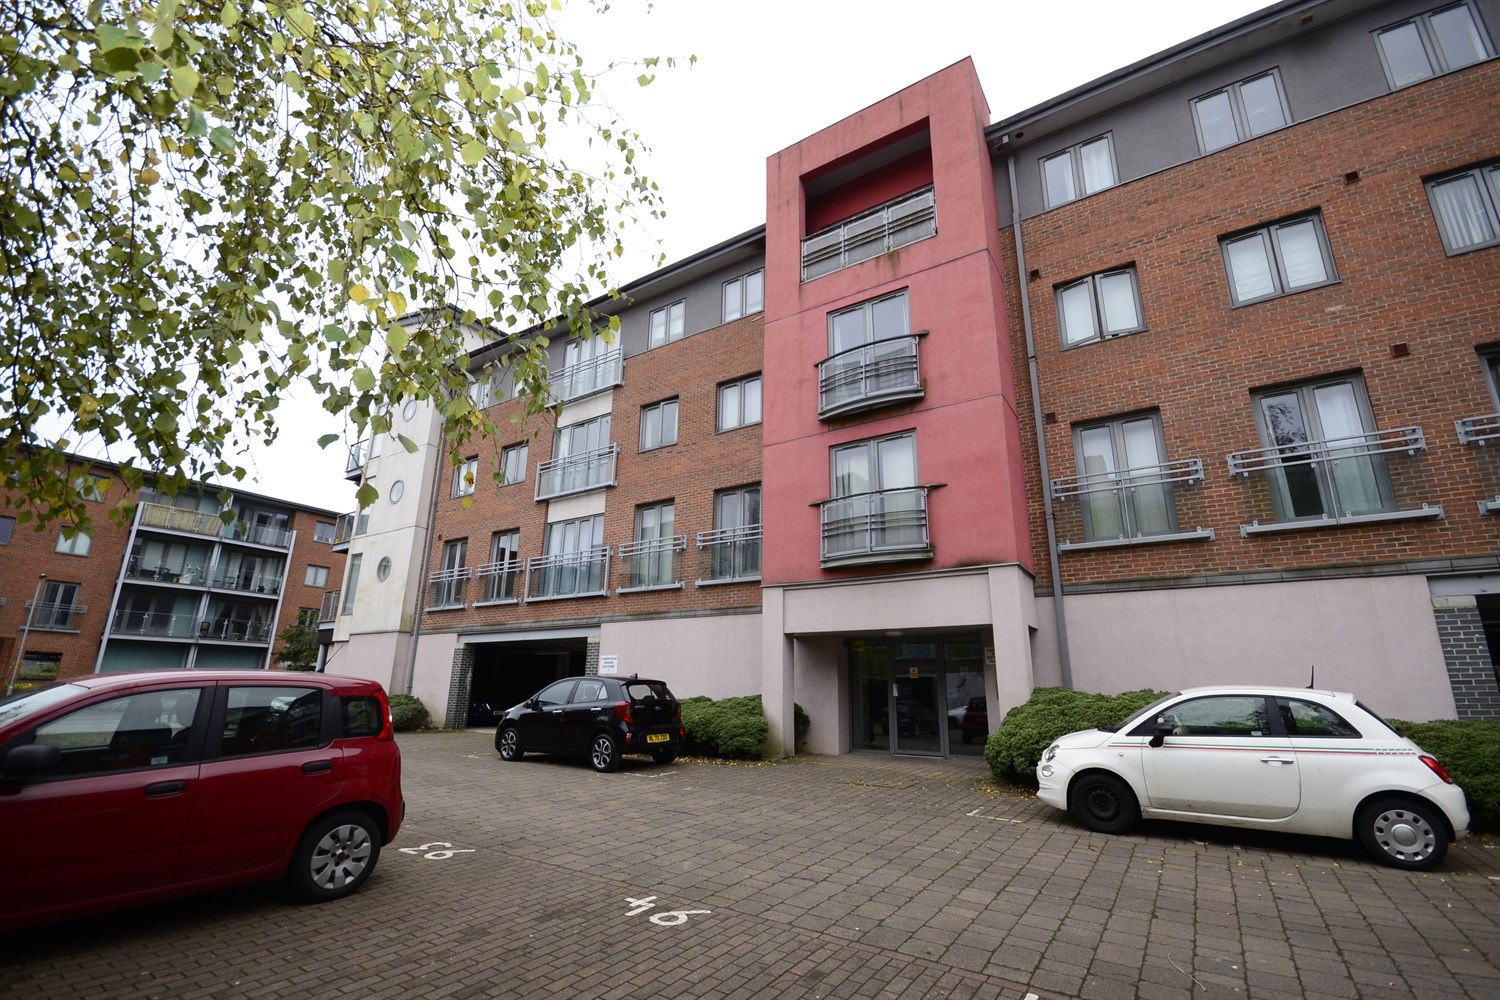 2 bed apartment for sale in Worsdell Drive, Gateshead - Property Image 1